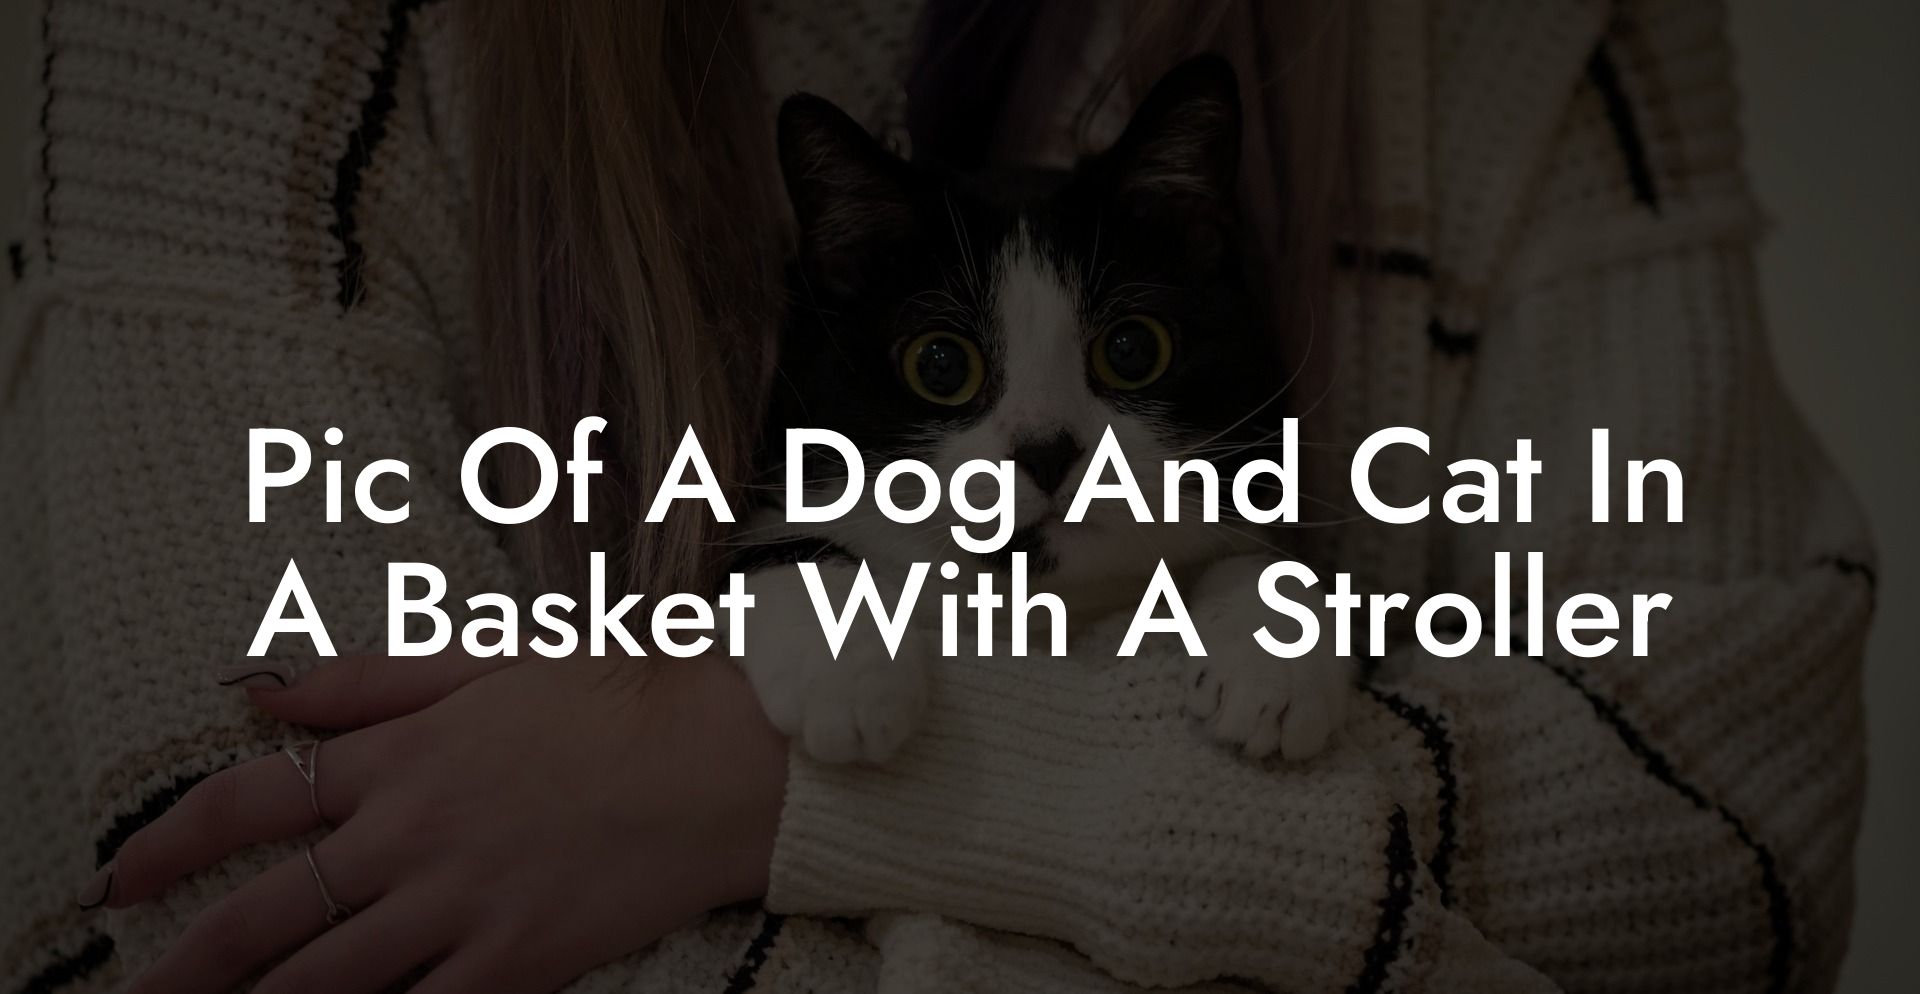 Pic Of A Dog And Cat In A Basket With A Stroller